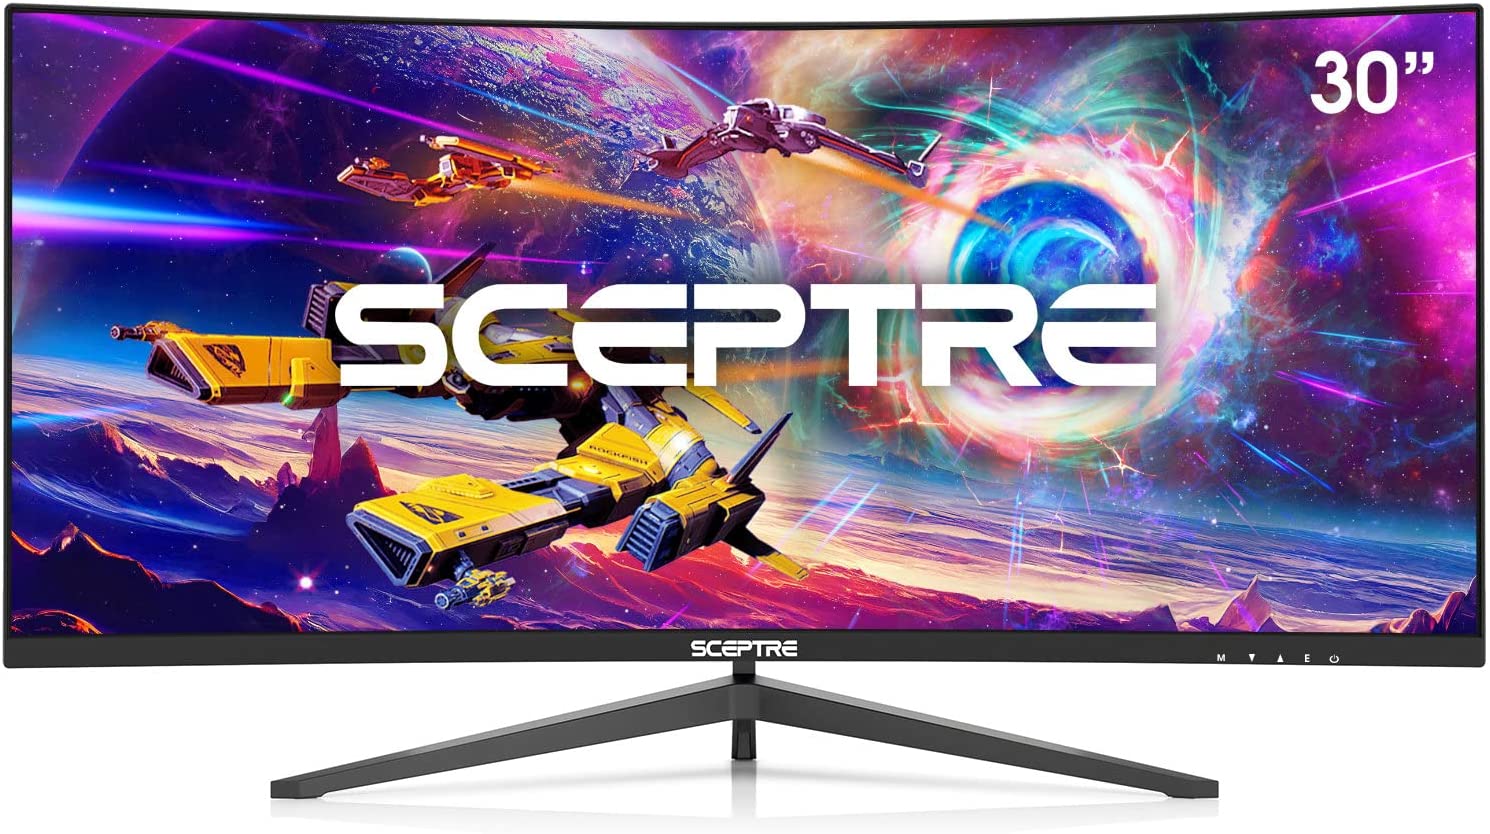 30" Sceptre 2560x1080p 200Hz 1ms Ultra-Wide Curved Gaming Monitor w/ Built-in Speakers $170 + Free Shipping